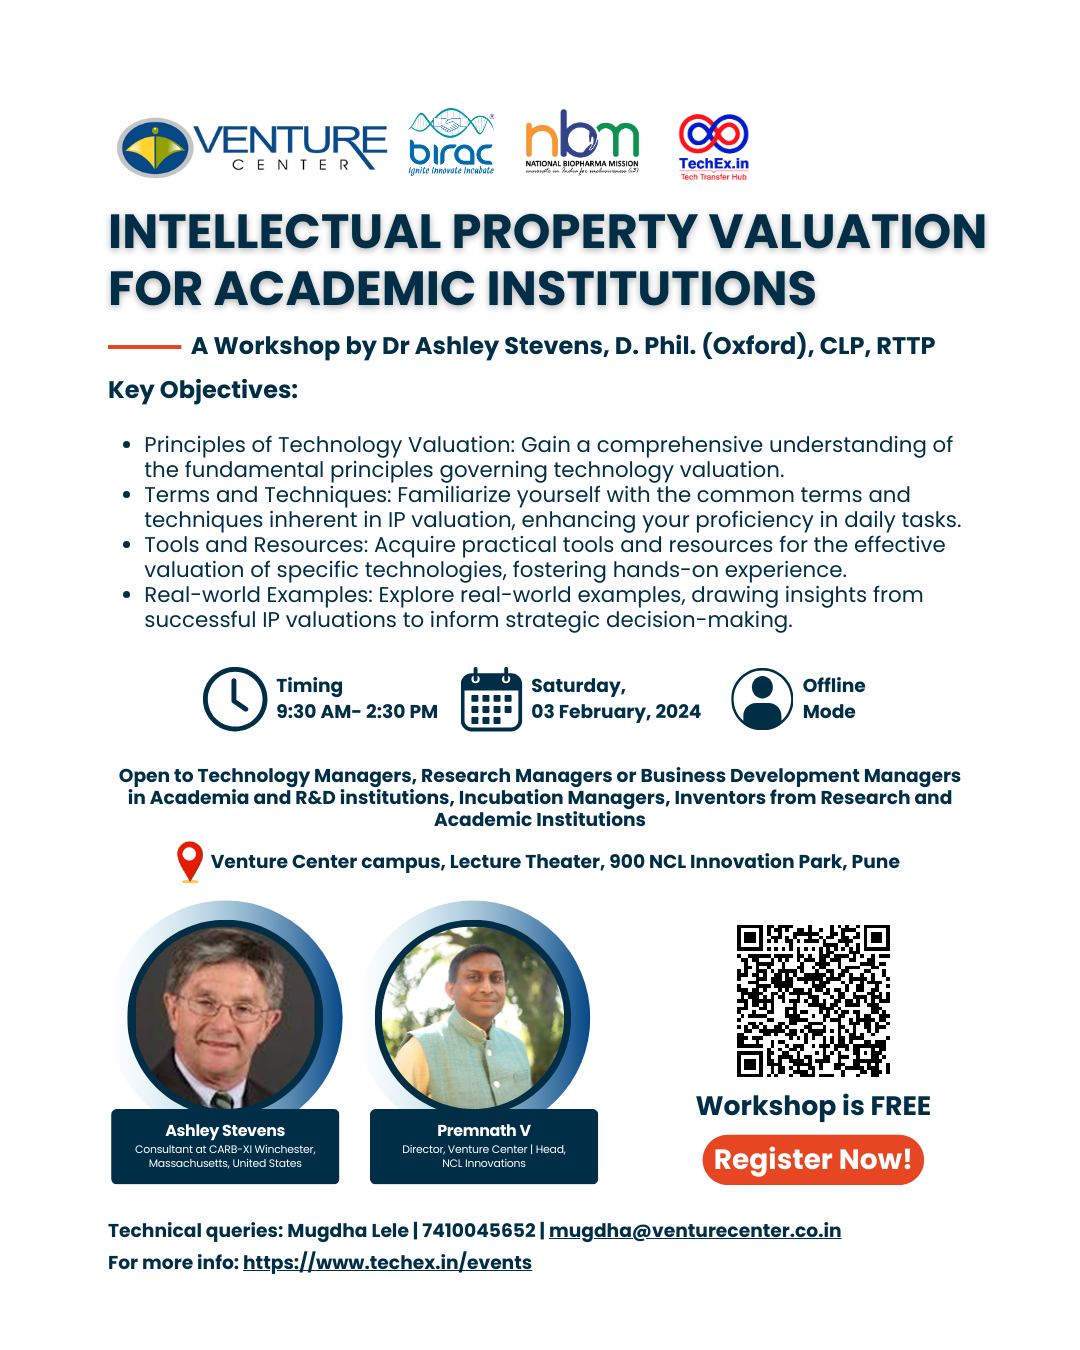 Intellectual Property Valuation for Academic Institutions